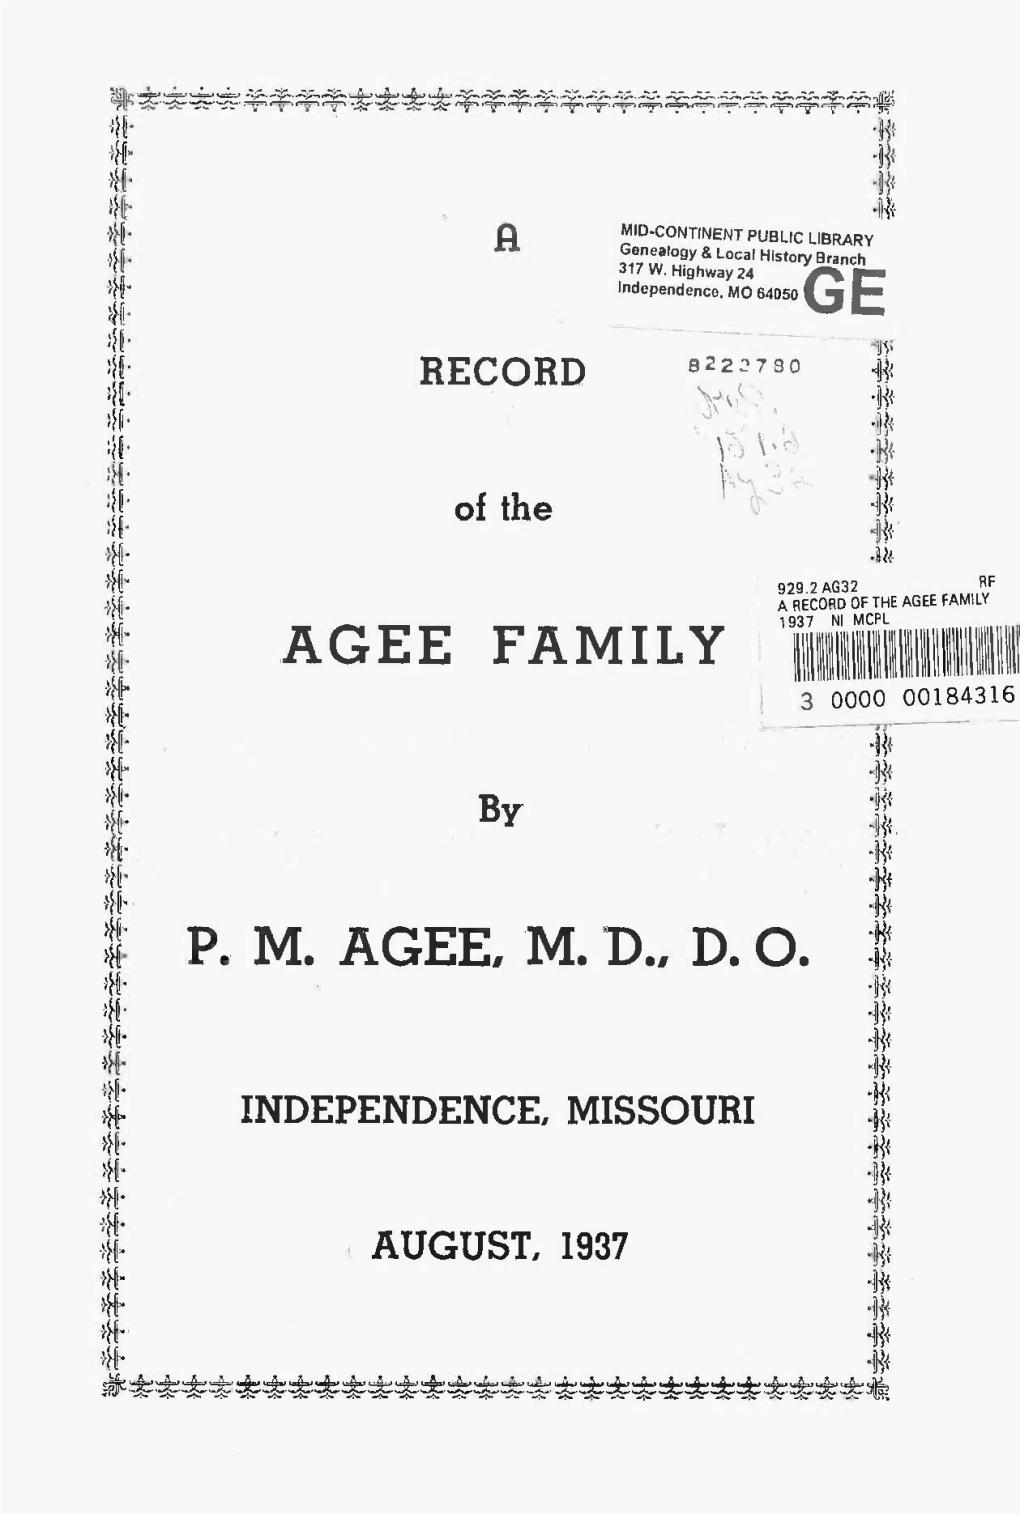 A Record of the Agee Family." We Owe Him a Lasting Debt of Gratitude for His Careful Research and Accurate Recording of His Findings